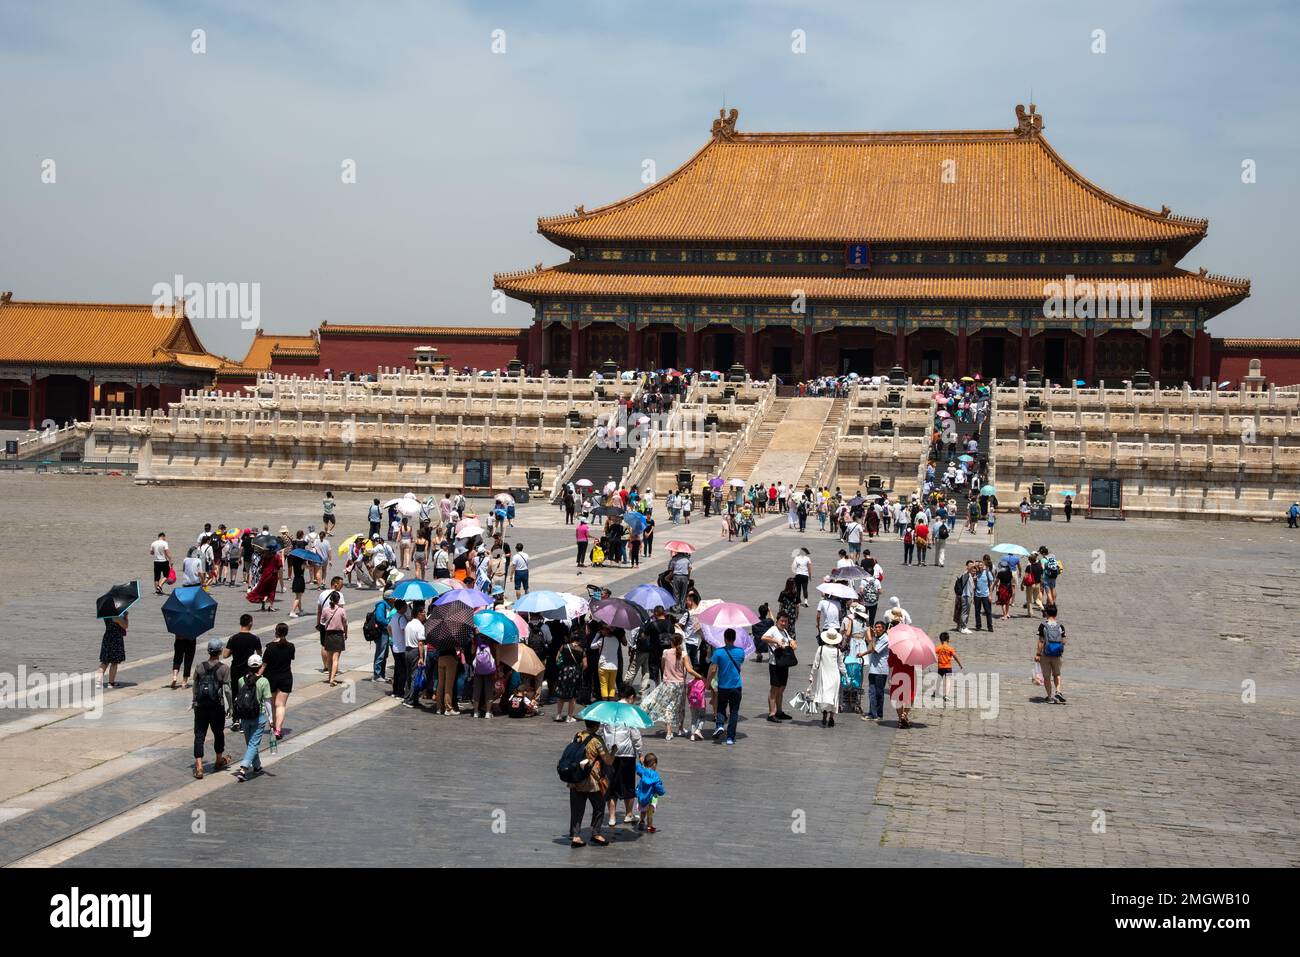 Beijing, China , June 5 2018: Crowd of Tourist People with umbrellas at the entrance of the famous Forbidden palace city in Beijing, China Stock Photo